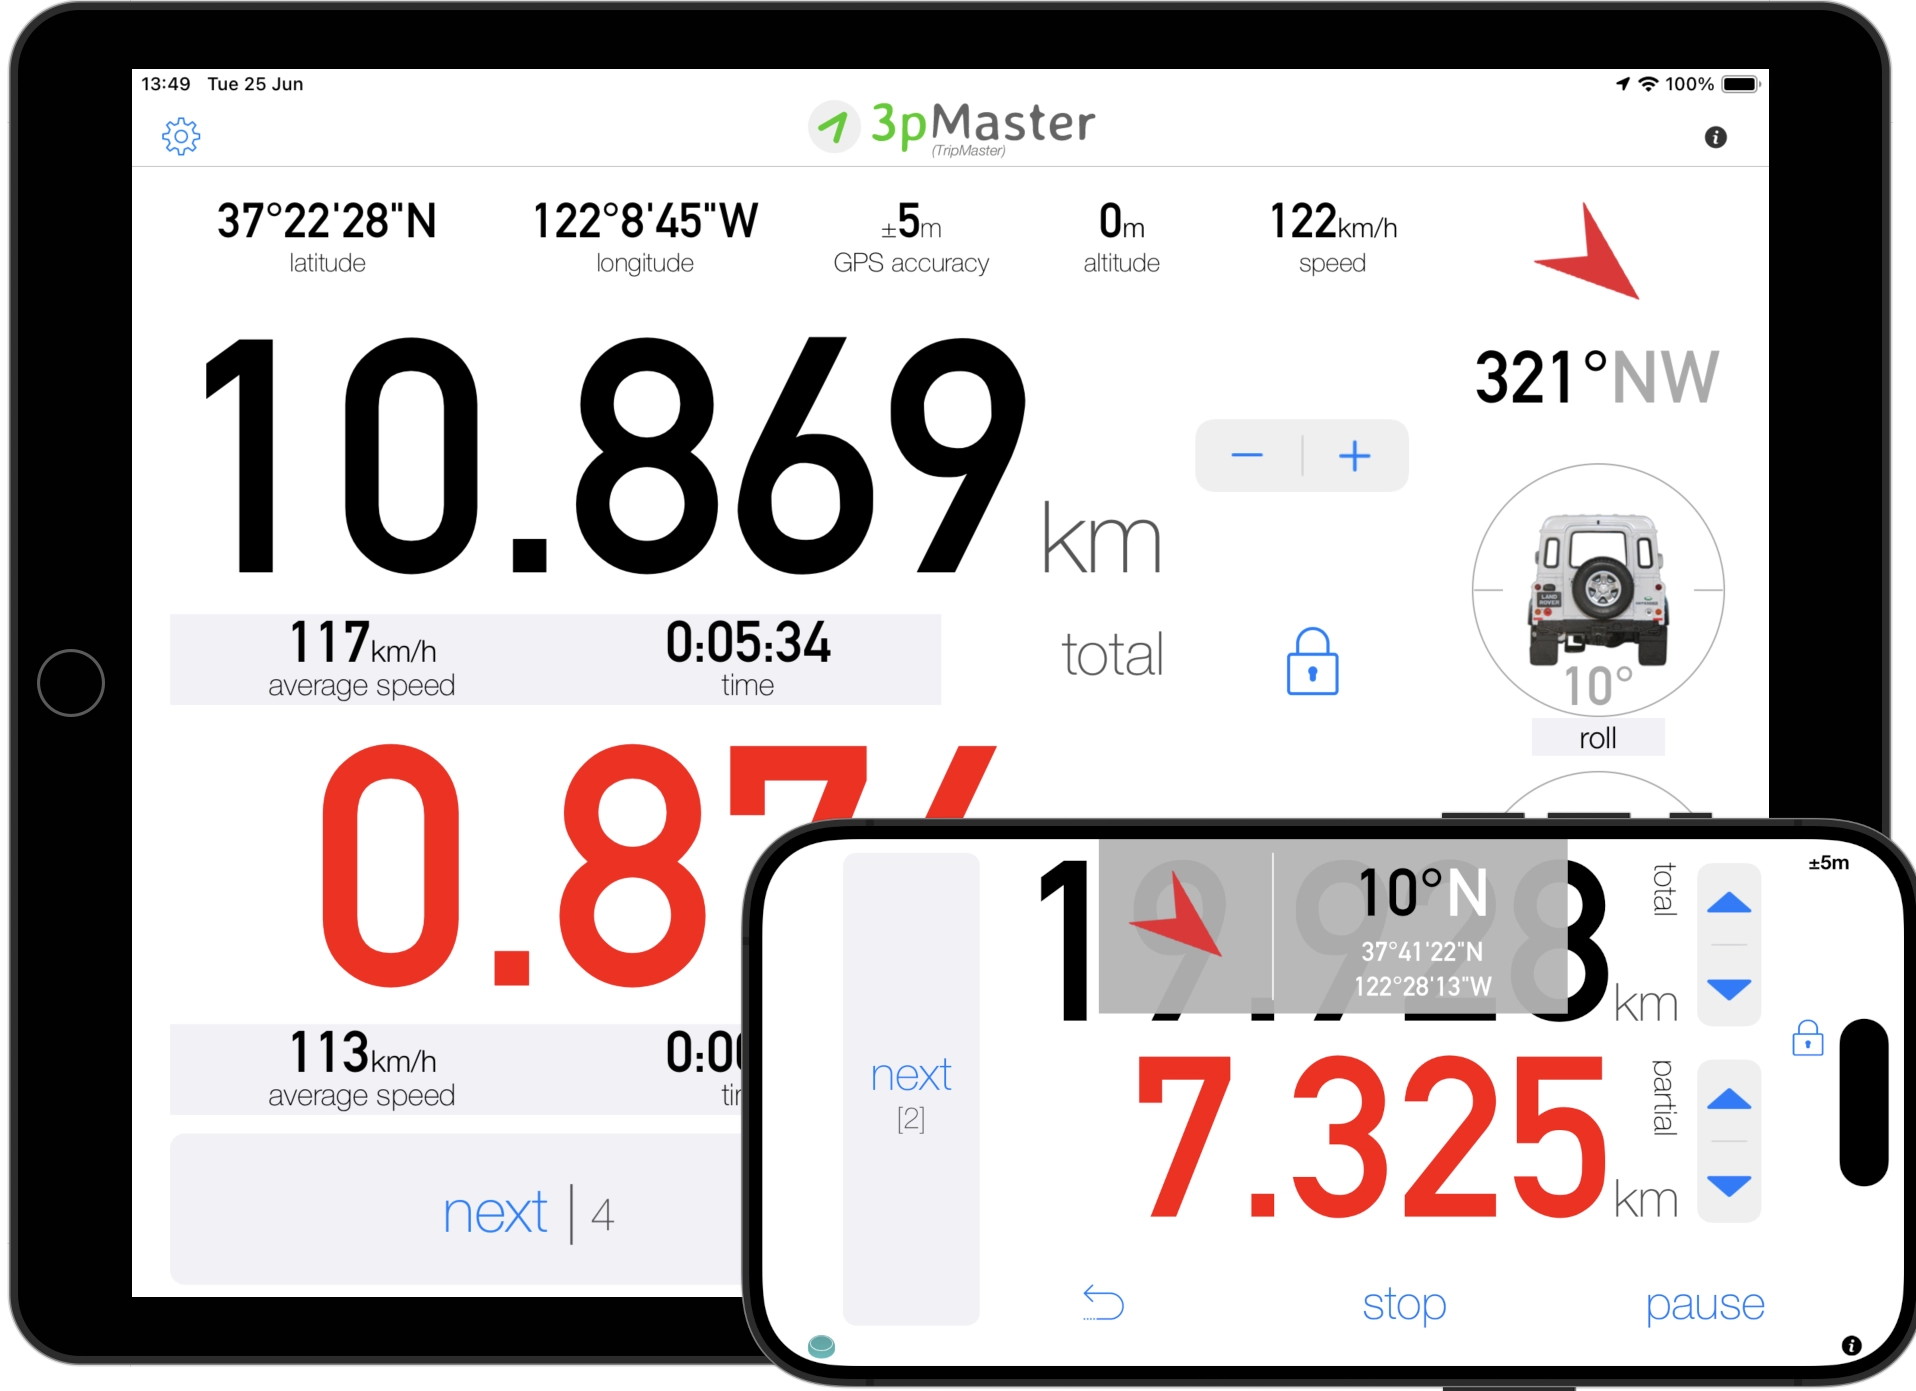 3pMaster - Tripmaster Odometer App for Off-Road for iPad and iPhone